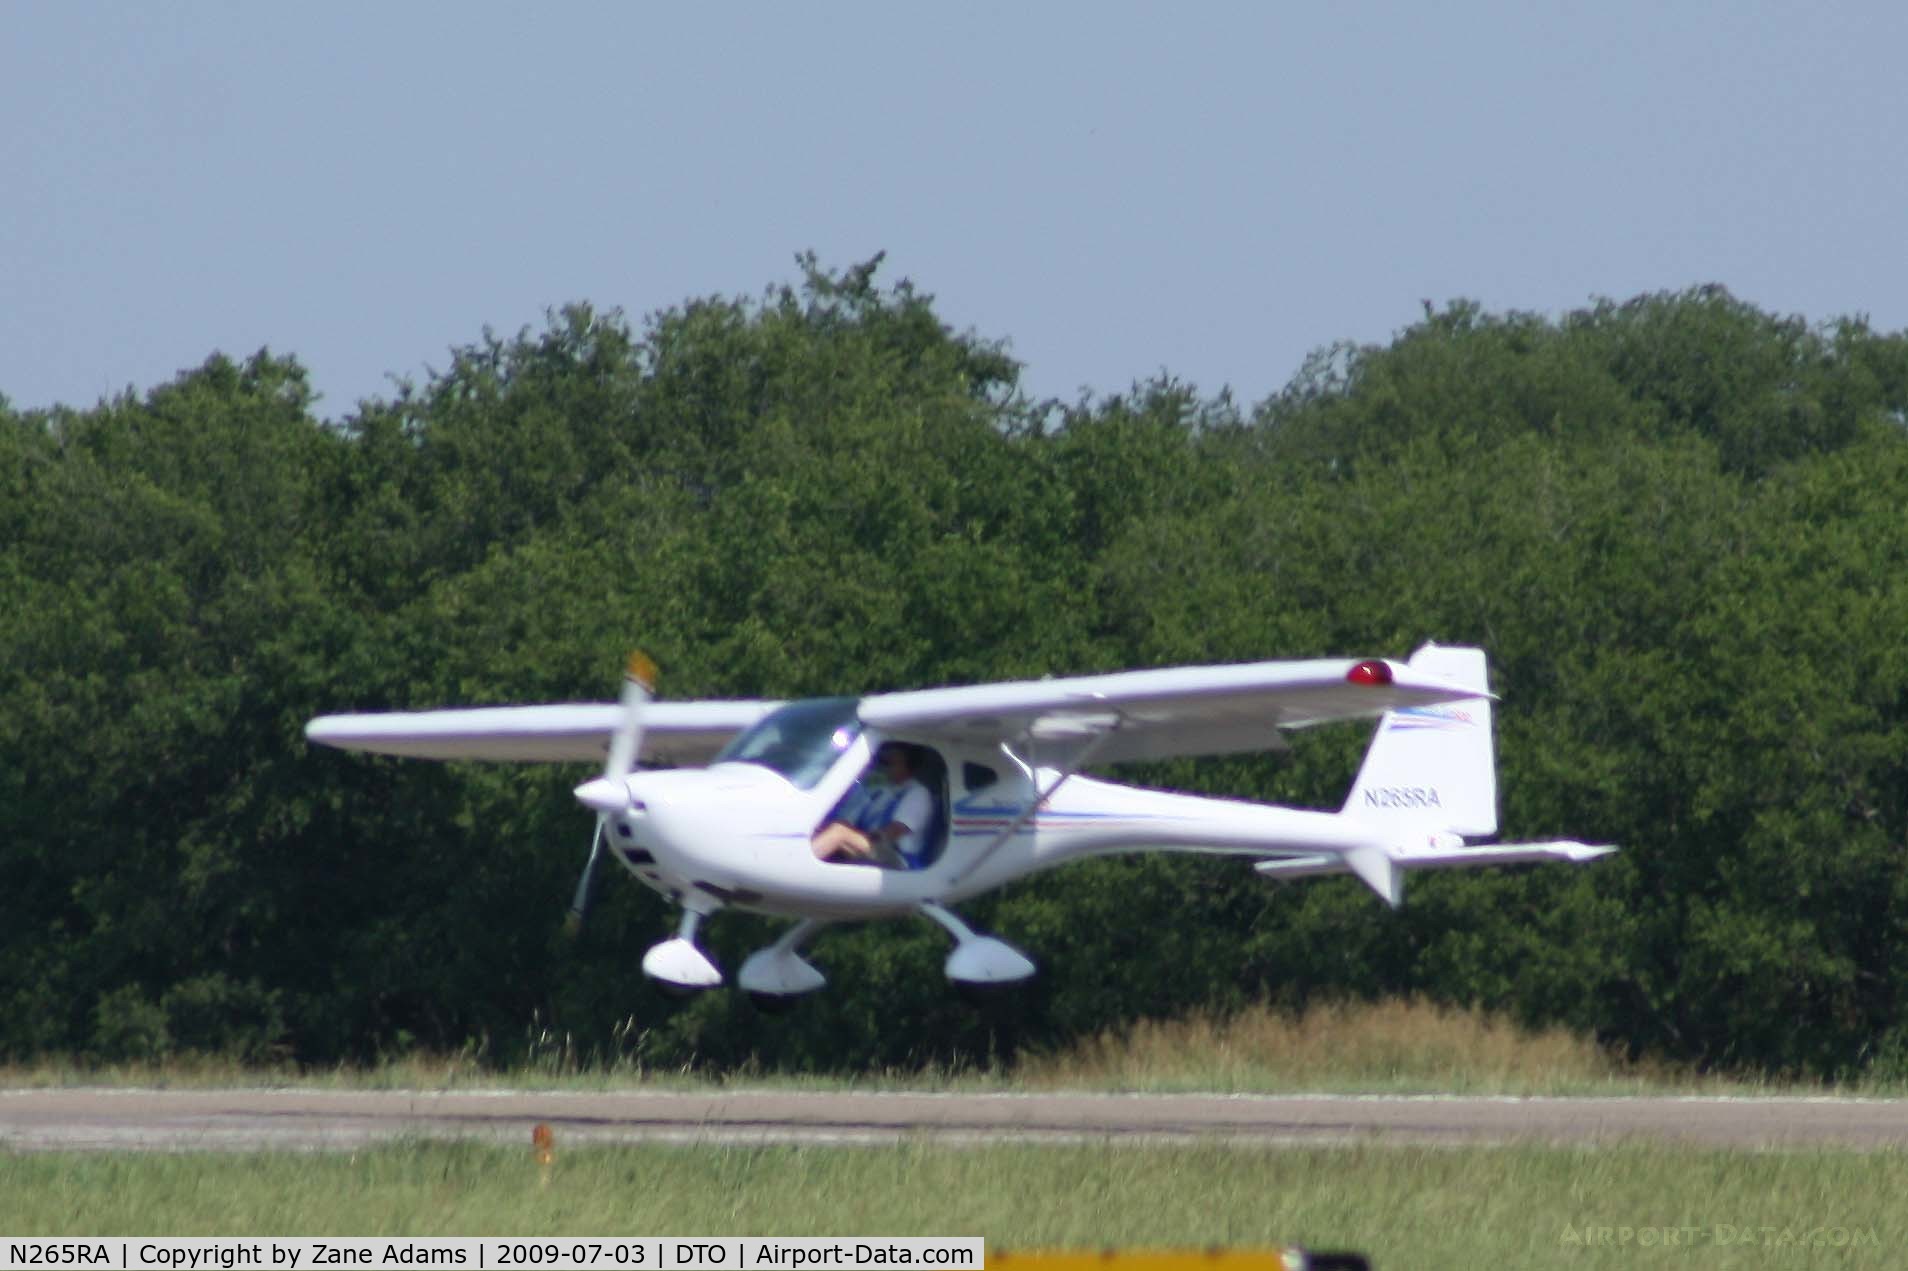 N265RA, 2007 Remos G-3/600 Mirage C/N 229, At Denton Municipal (it's hot out there! )